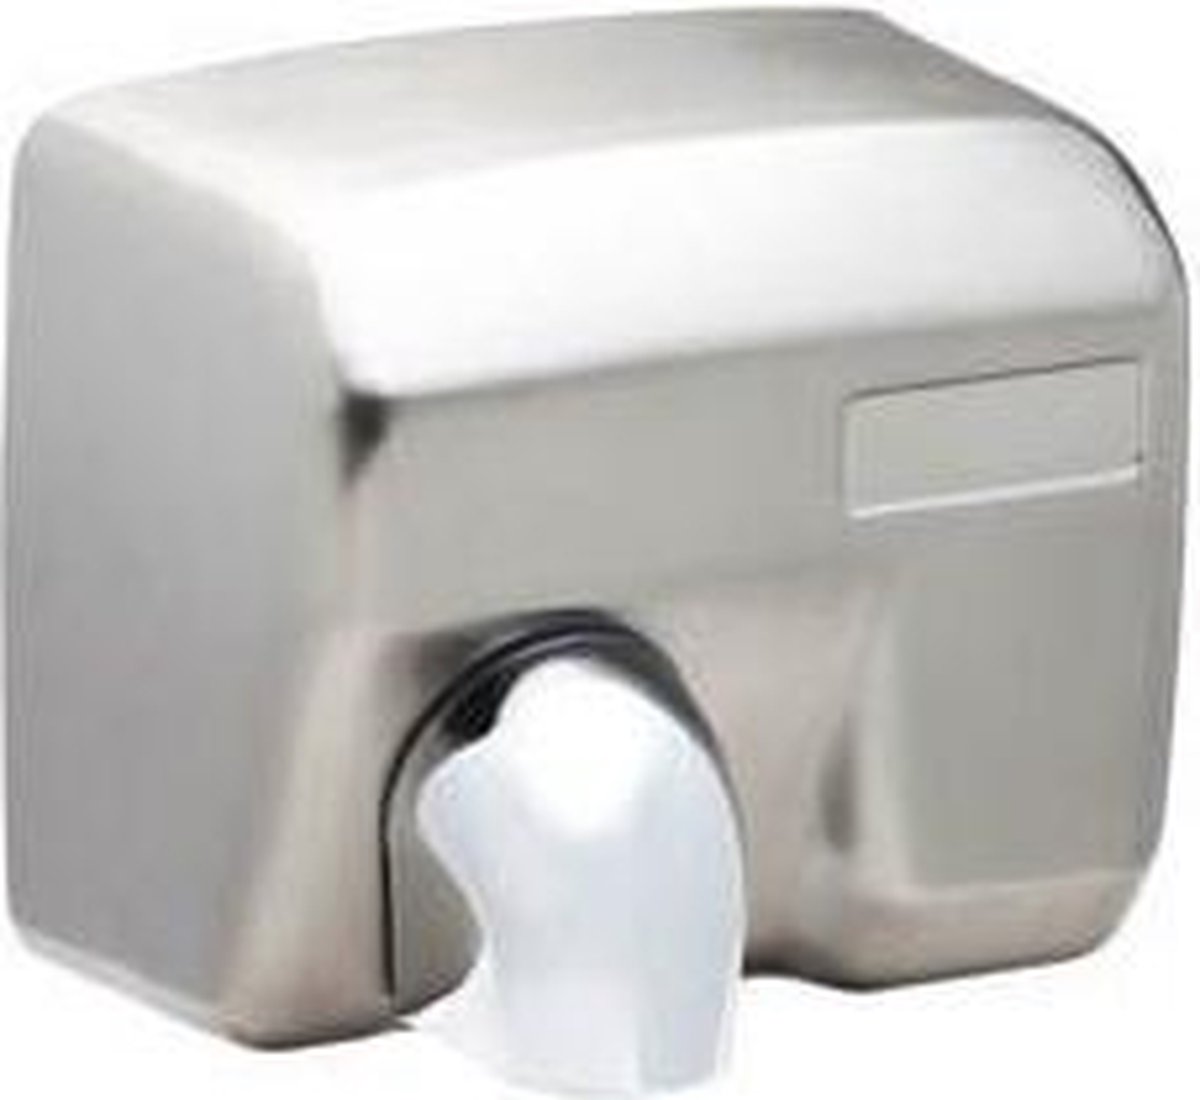 Durable construction -Hand dryer 2400w - Brushed stainess steel